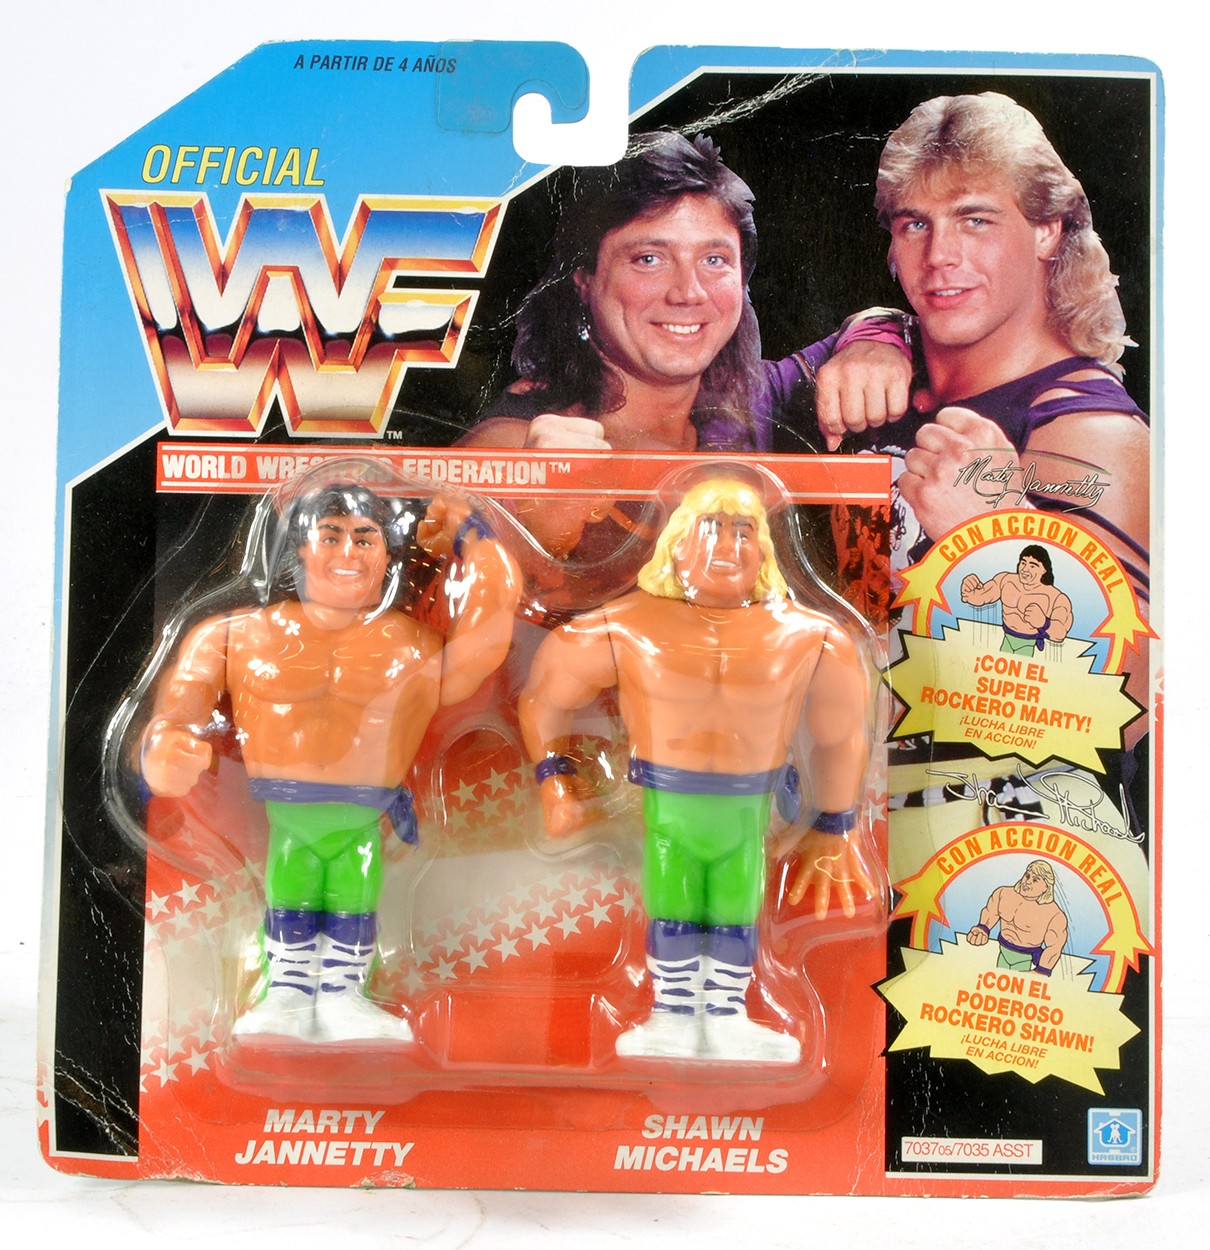 Hasbro WWF World Wrestling Federation 1990 figure pack comprising Marty Jannetty and Shawn Michaels.